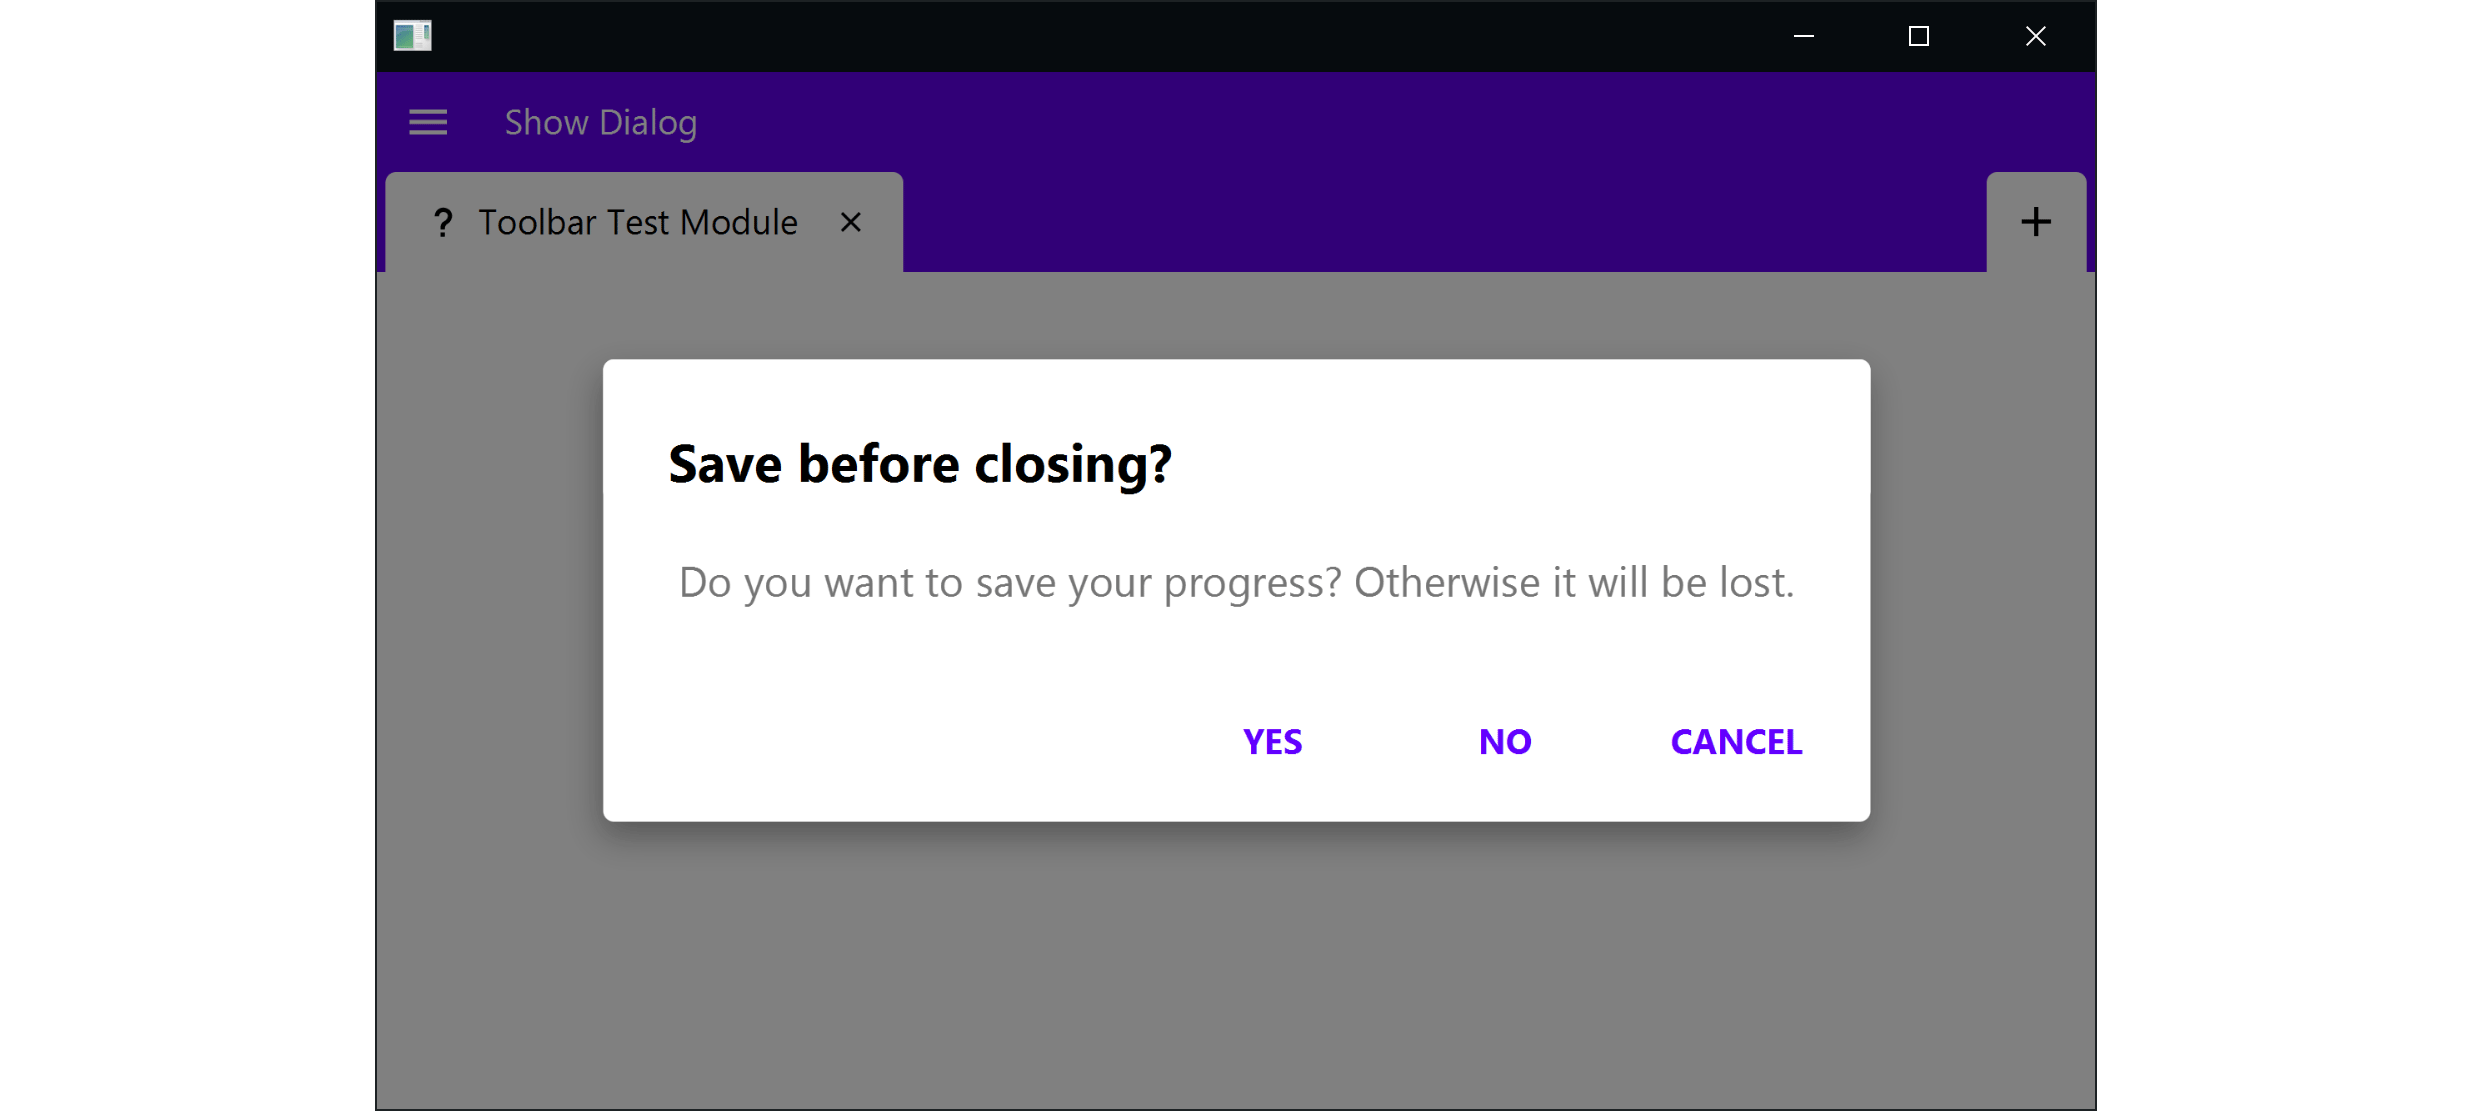 Image of a dialog which asks about saving before closing the module